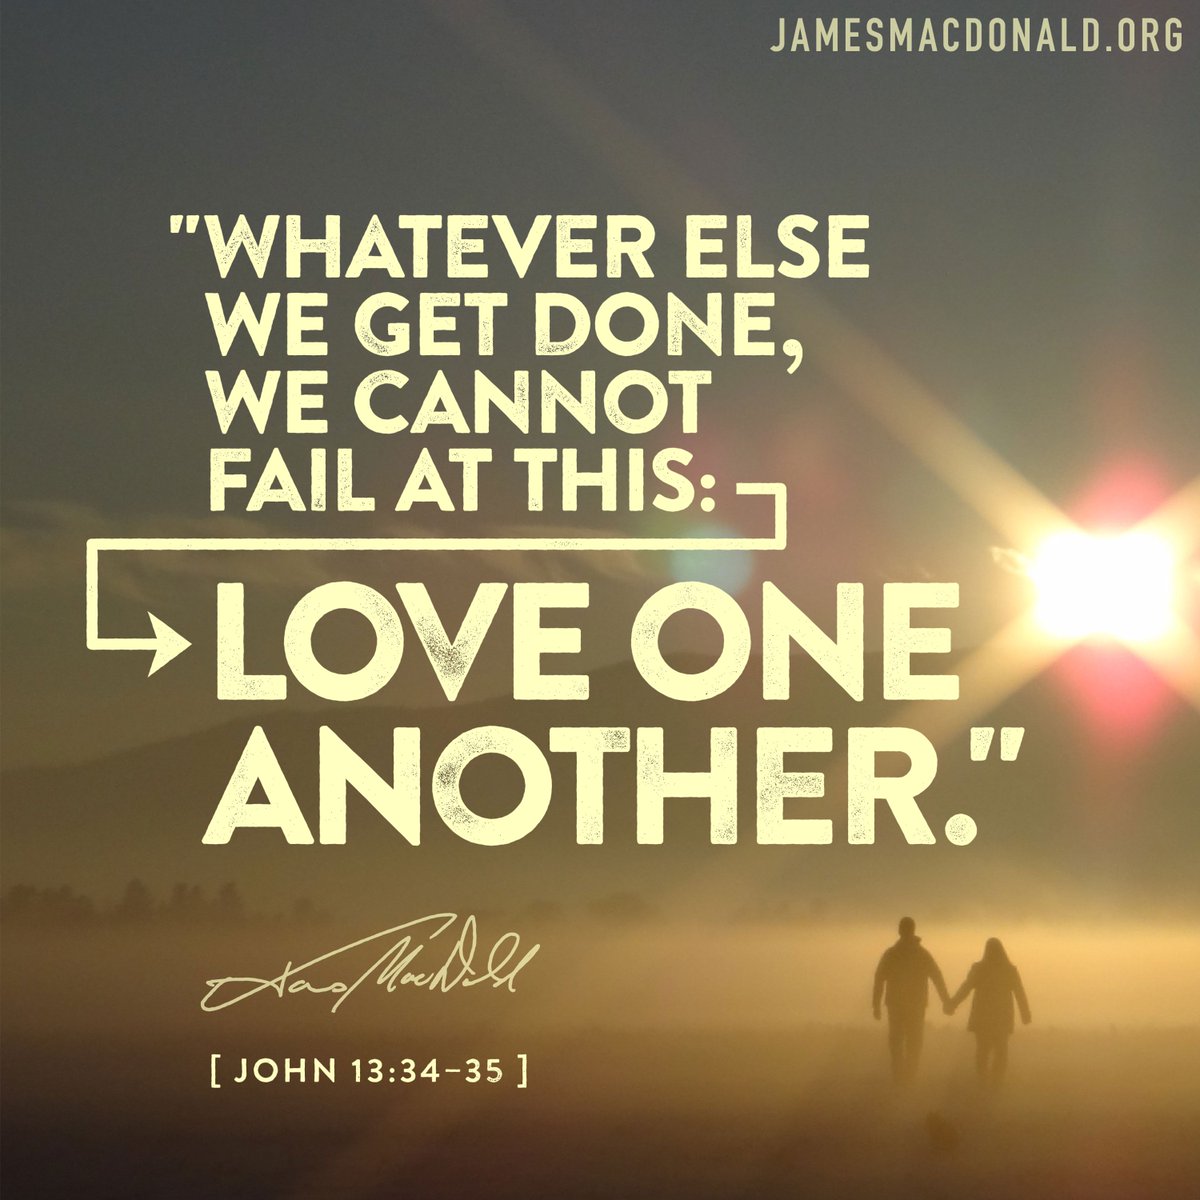 James MacDonald on Twitter: "Whatever else we get done, we cannot fail at  this: Love one another. [John 13:34-35] #ThisIsWhatWeDo… "